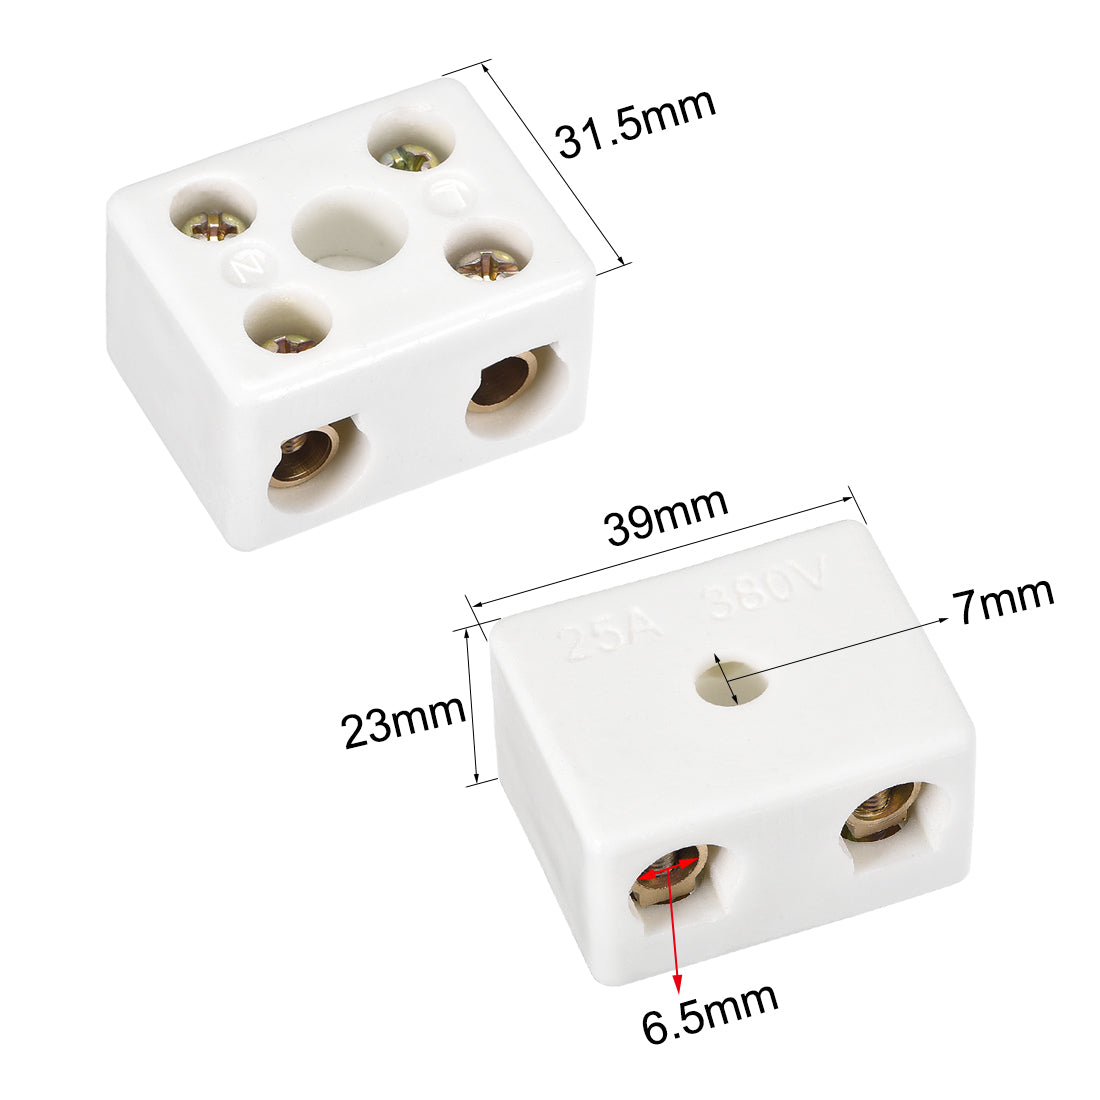 uxcell Uxcell 2 Way Ceramics Terminal Blocks High Temp Porcelain Ceramic Connectors 39x31.5x23mm for Electrical Wire Cable